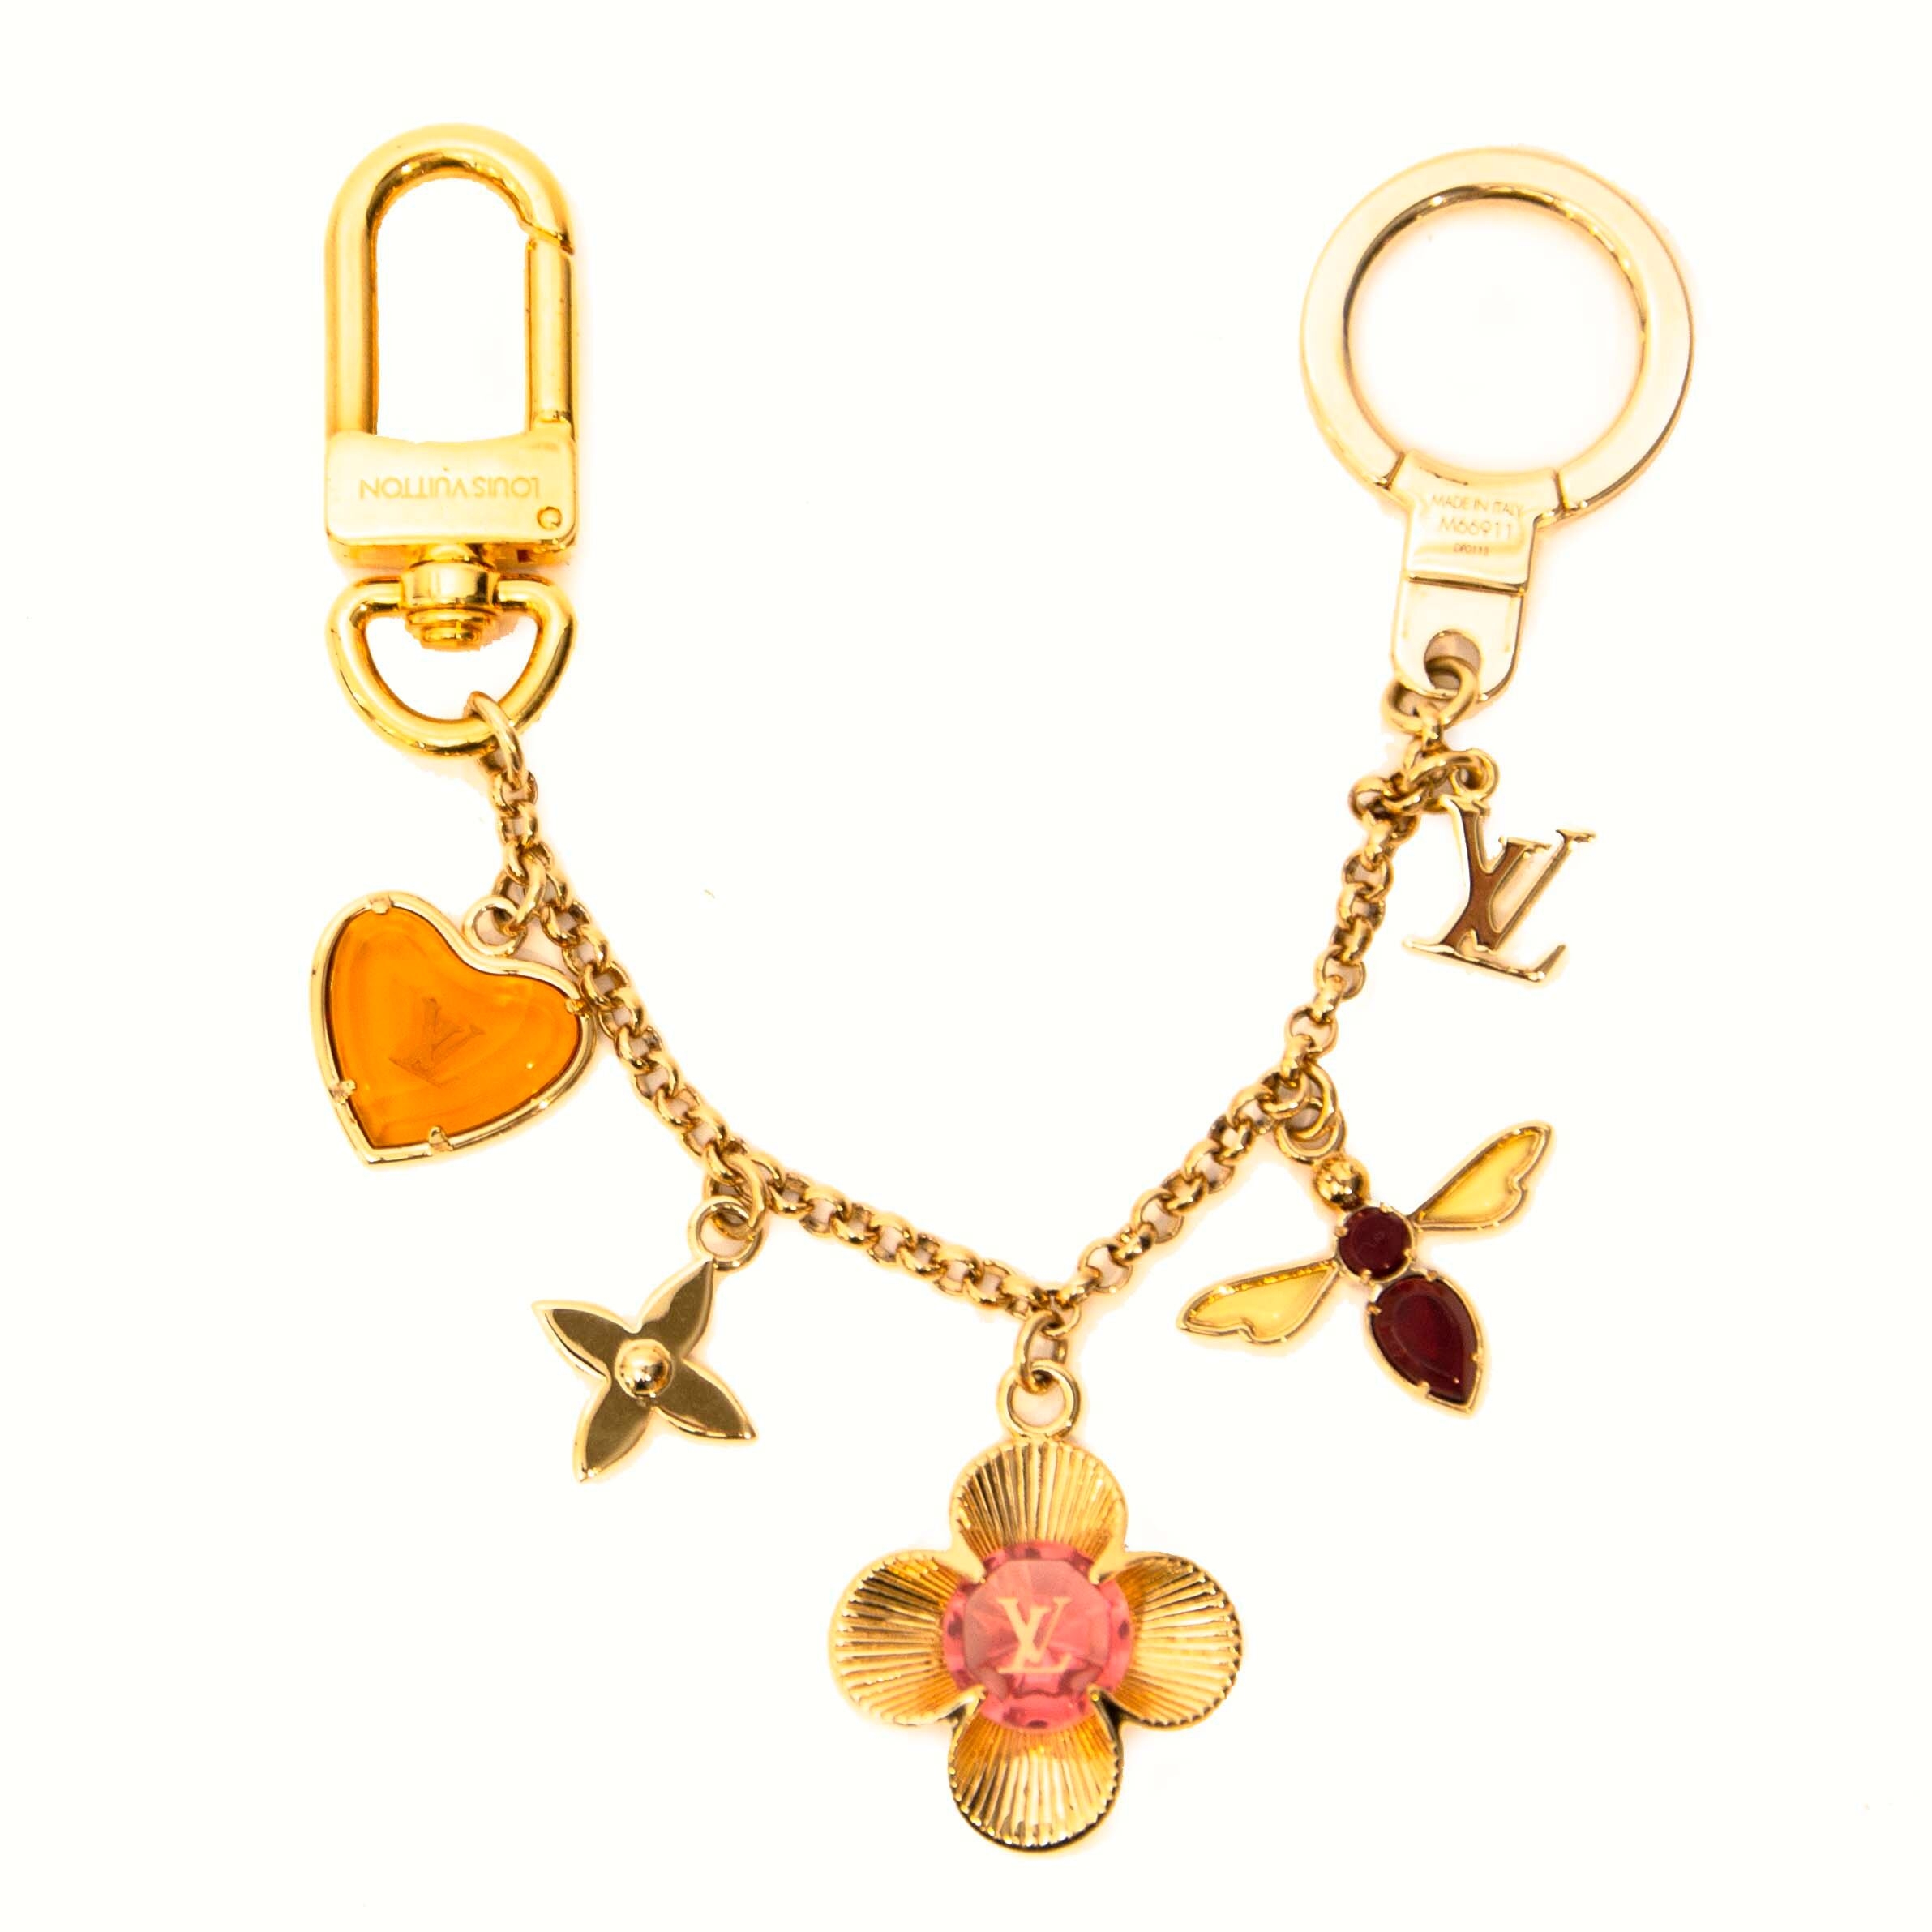 Blooming Flowers BB Bag Charm and Key Holder S00 - Accessories